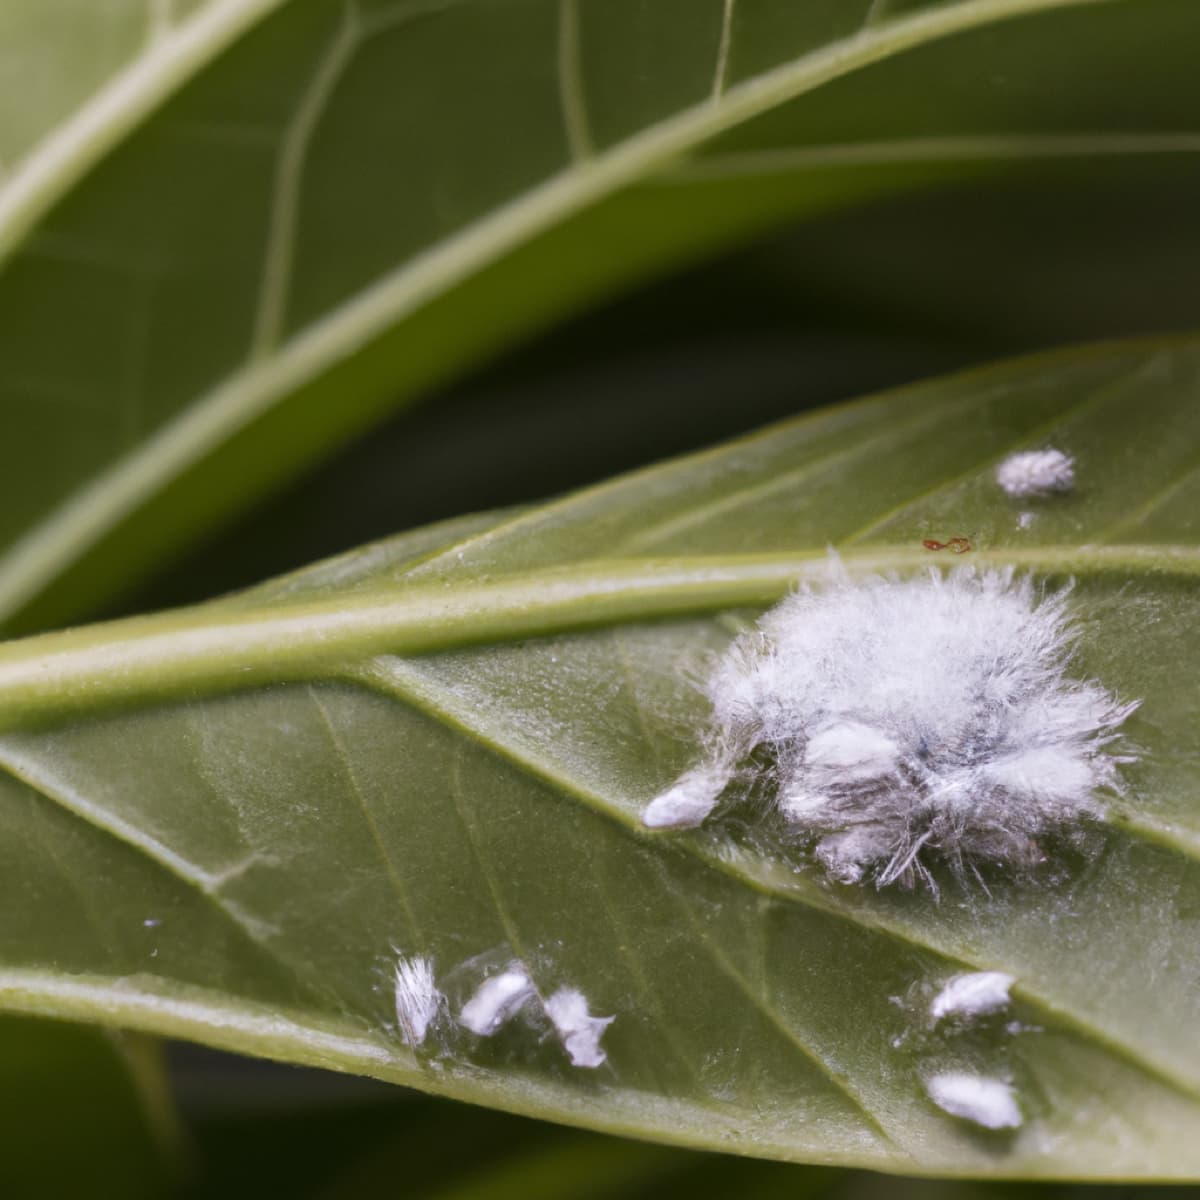 How to Get Rid of Mealybugs on Plants